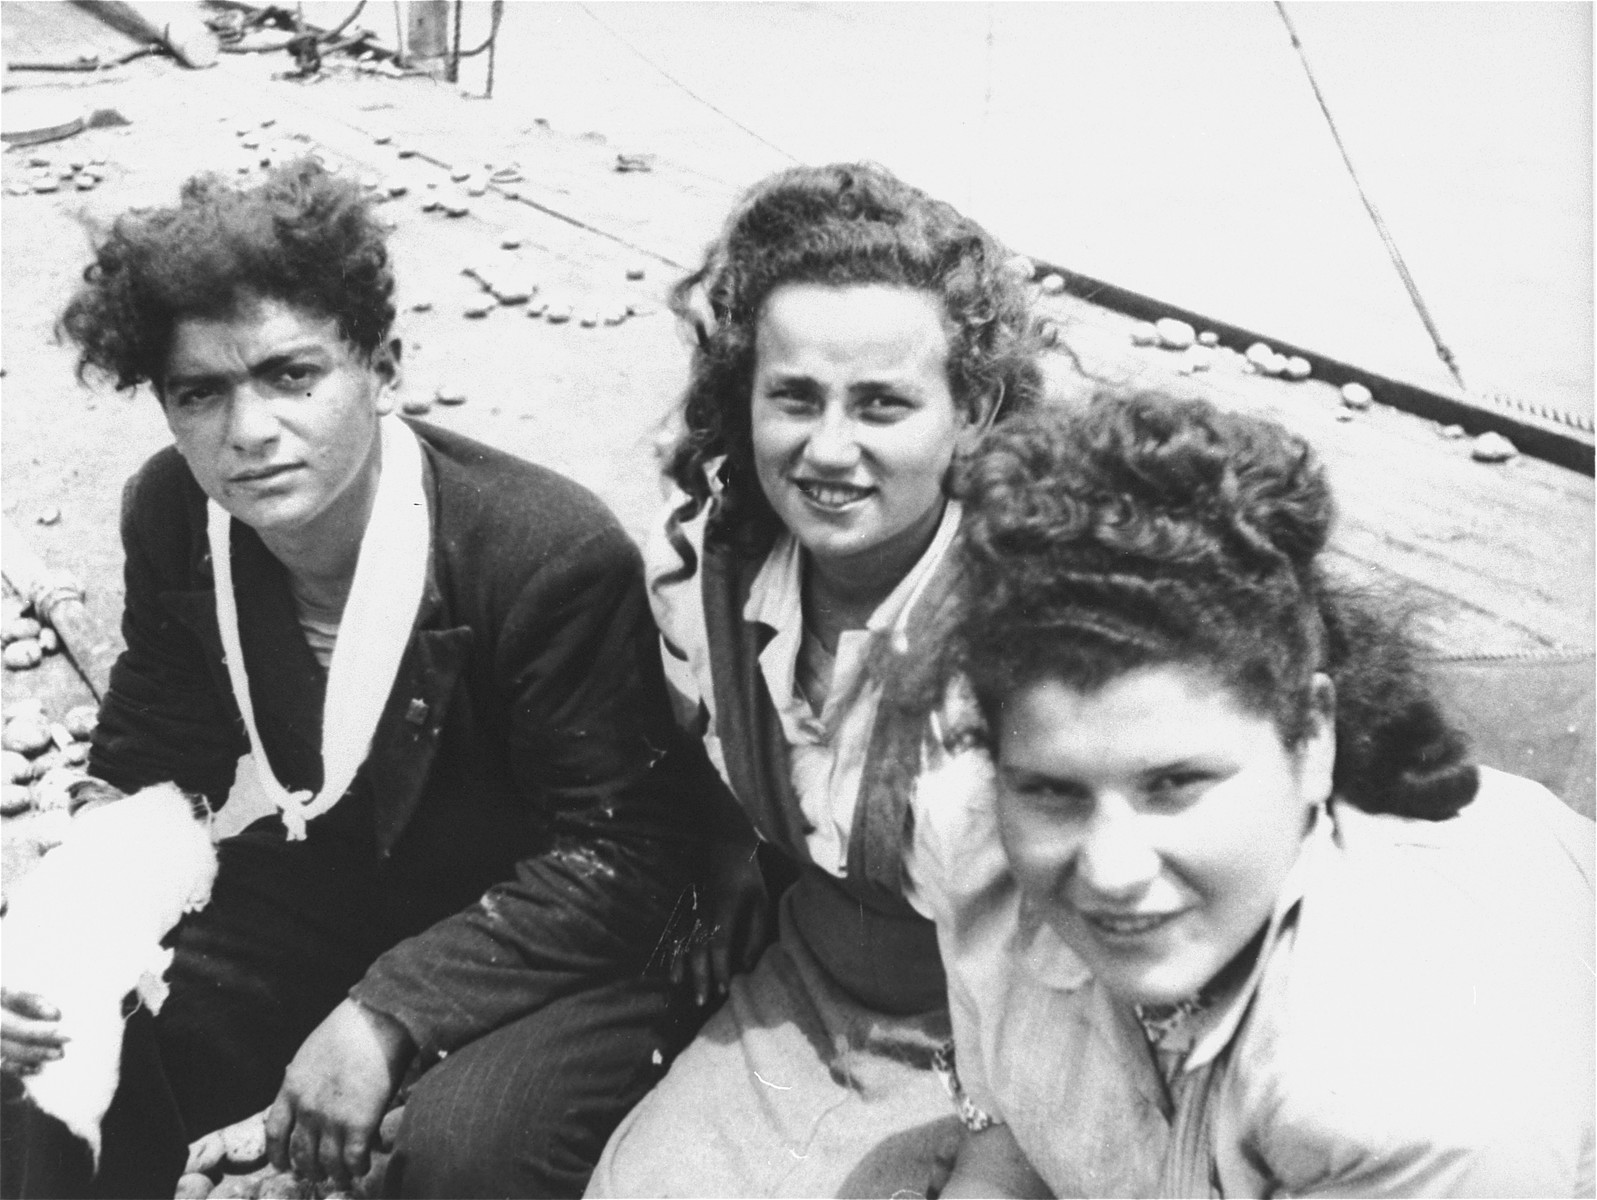 Three Jewish passengers, one of whom has been wounded, sit on the deck of the Exodus 1947.  Potatoes and other debris, used in the struggle with the British, lie on the deck behind them.